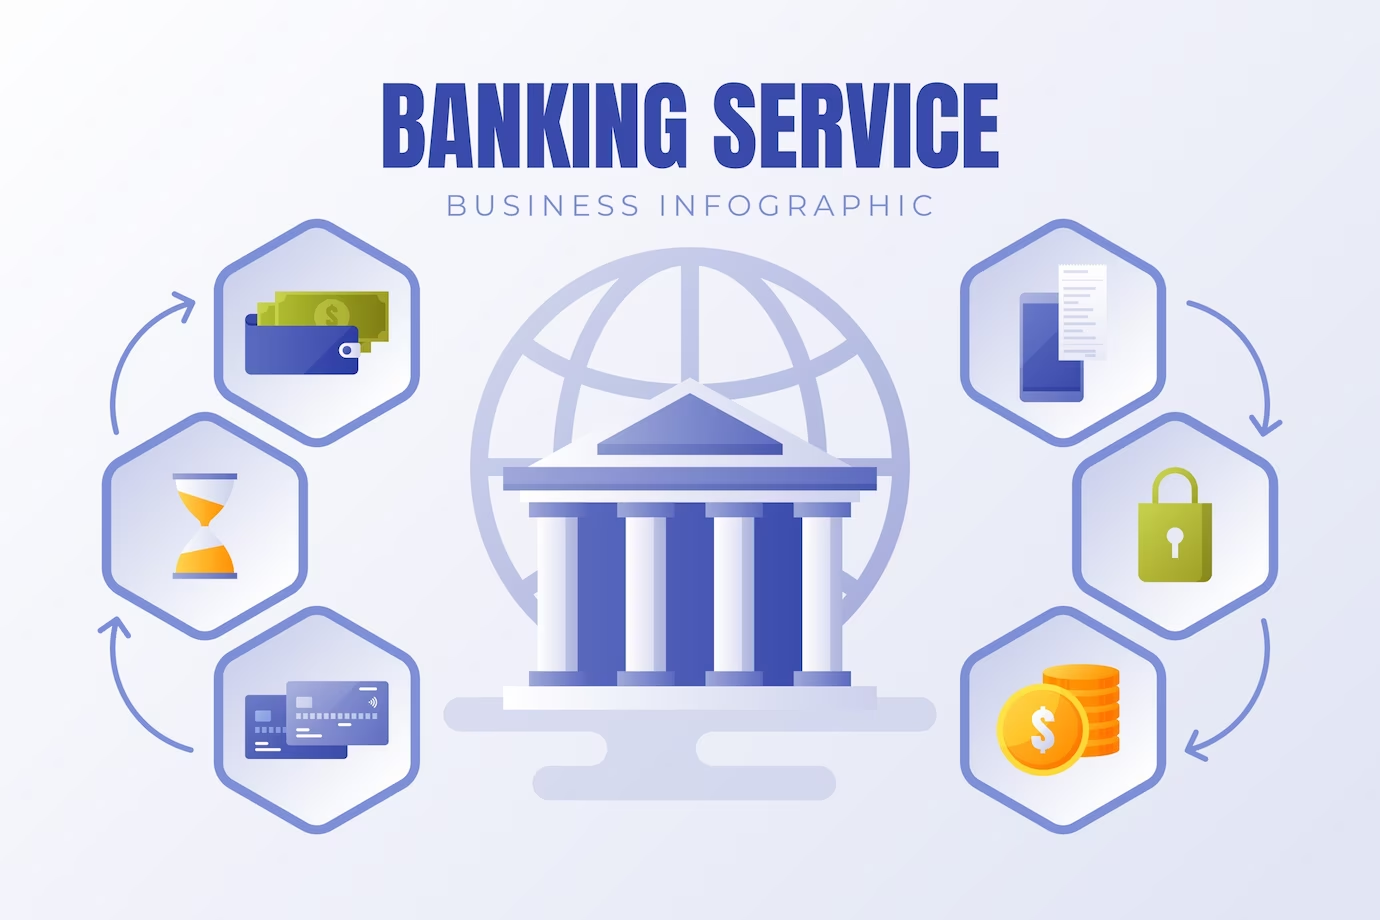 5 TRENDS IN OPEN BANKING YOU CANNOT AFFORD TO MISS